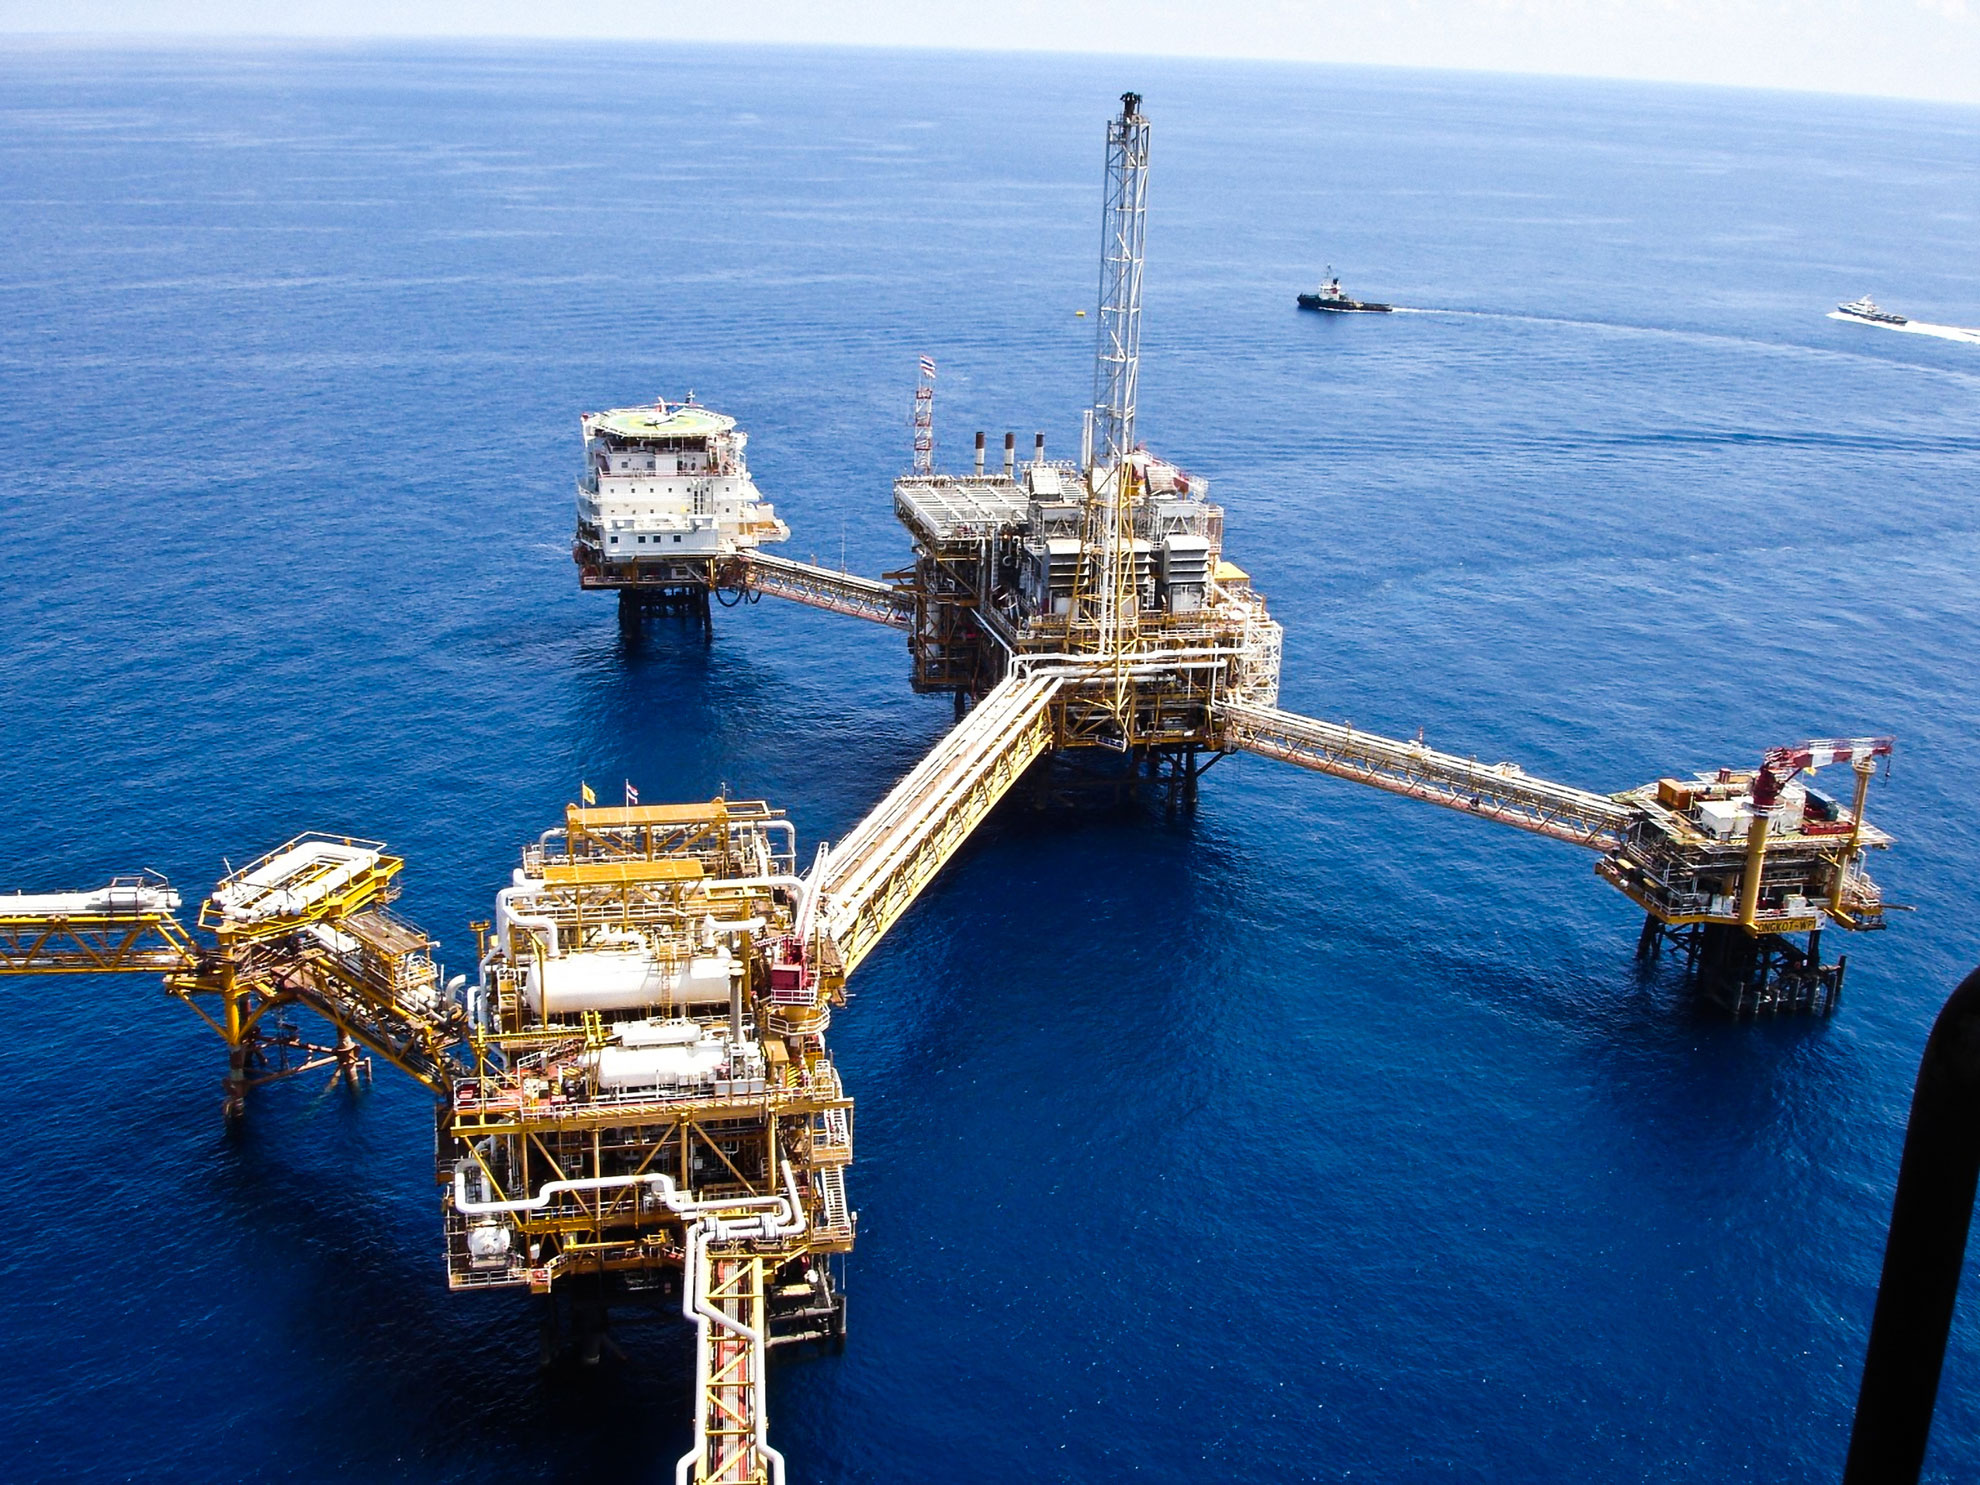 Offshore hookup and commissioning process